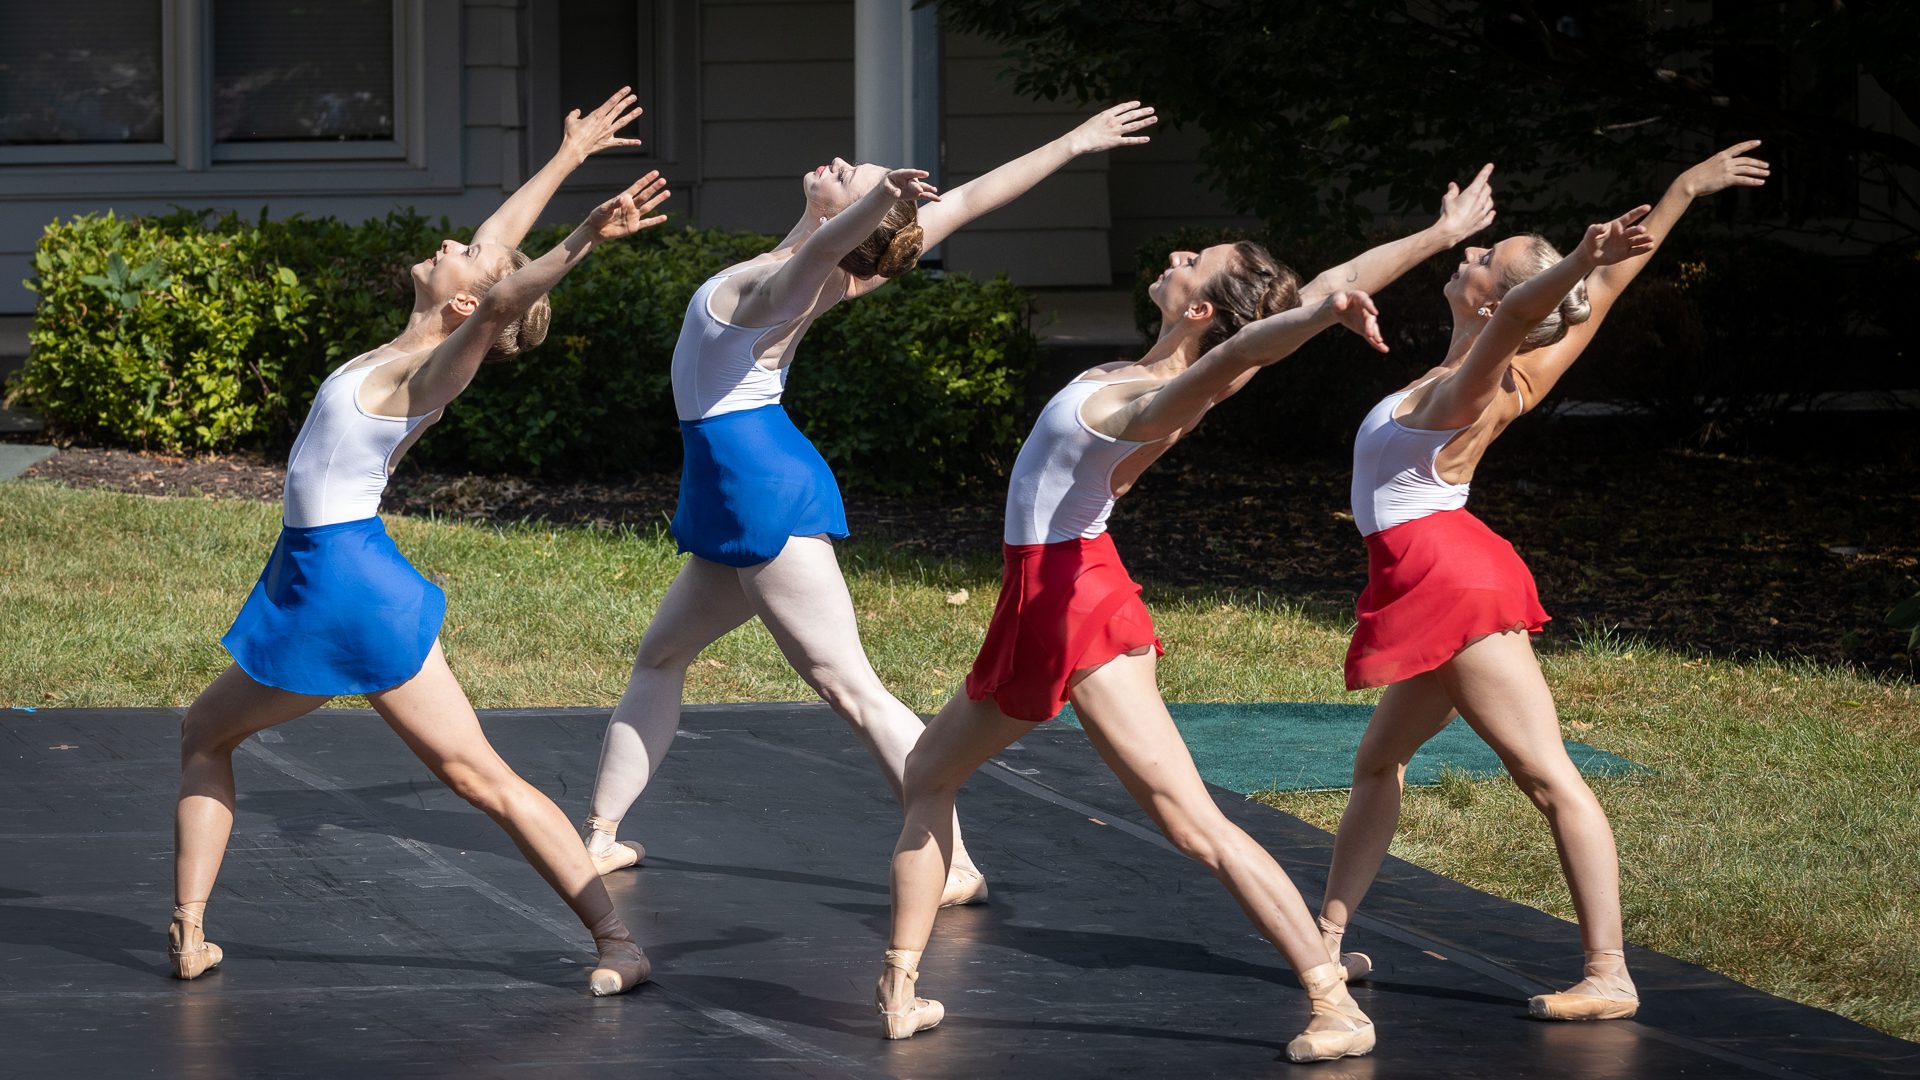 Ballet Quad Cities Returns This Weekend With Ballet On The Lawn At Davenport's Outing Club